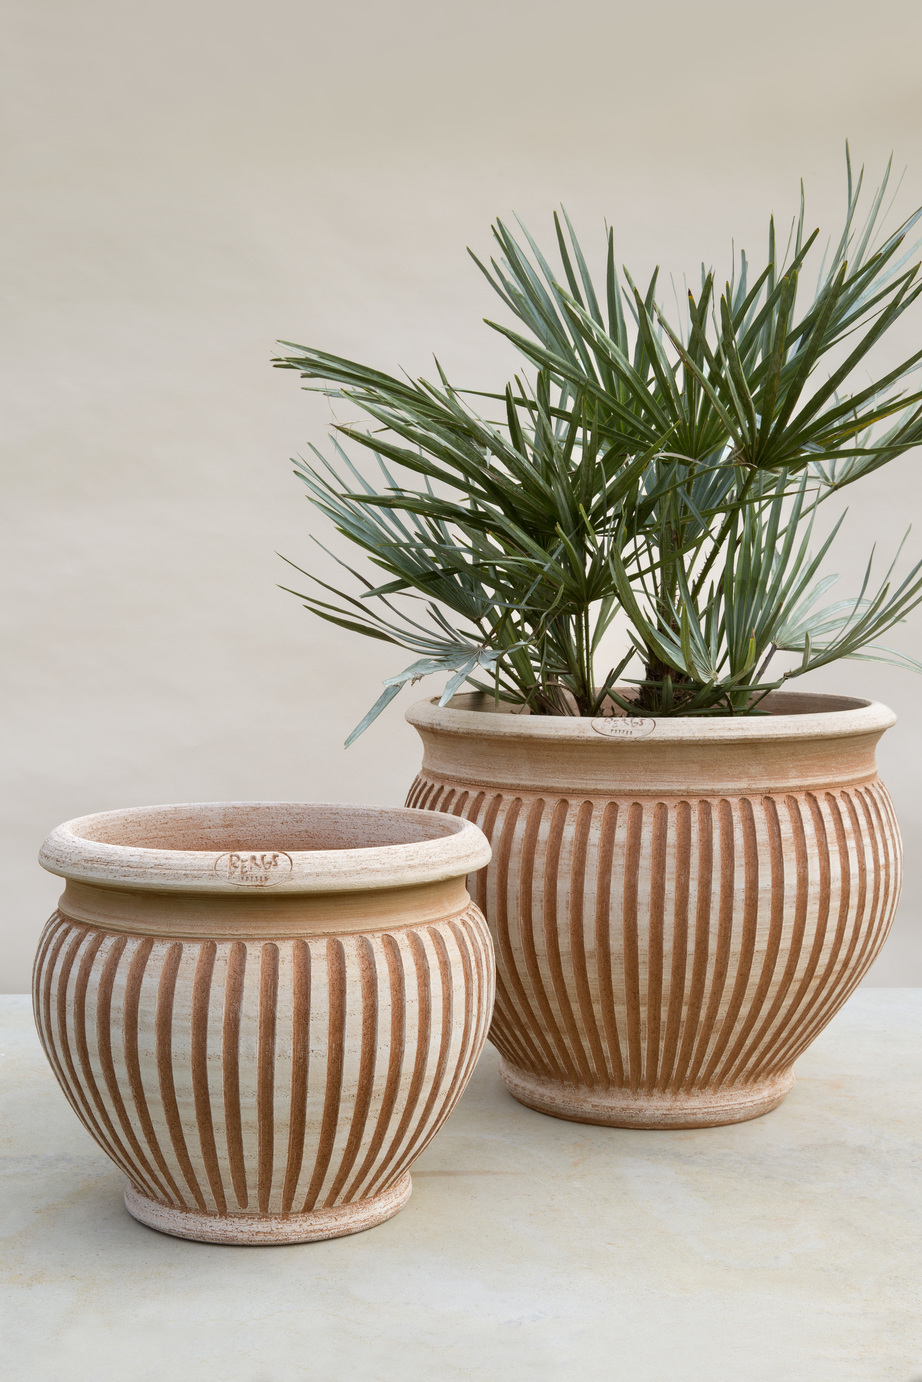 Two short curved pots with vertical lines and a green plant